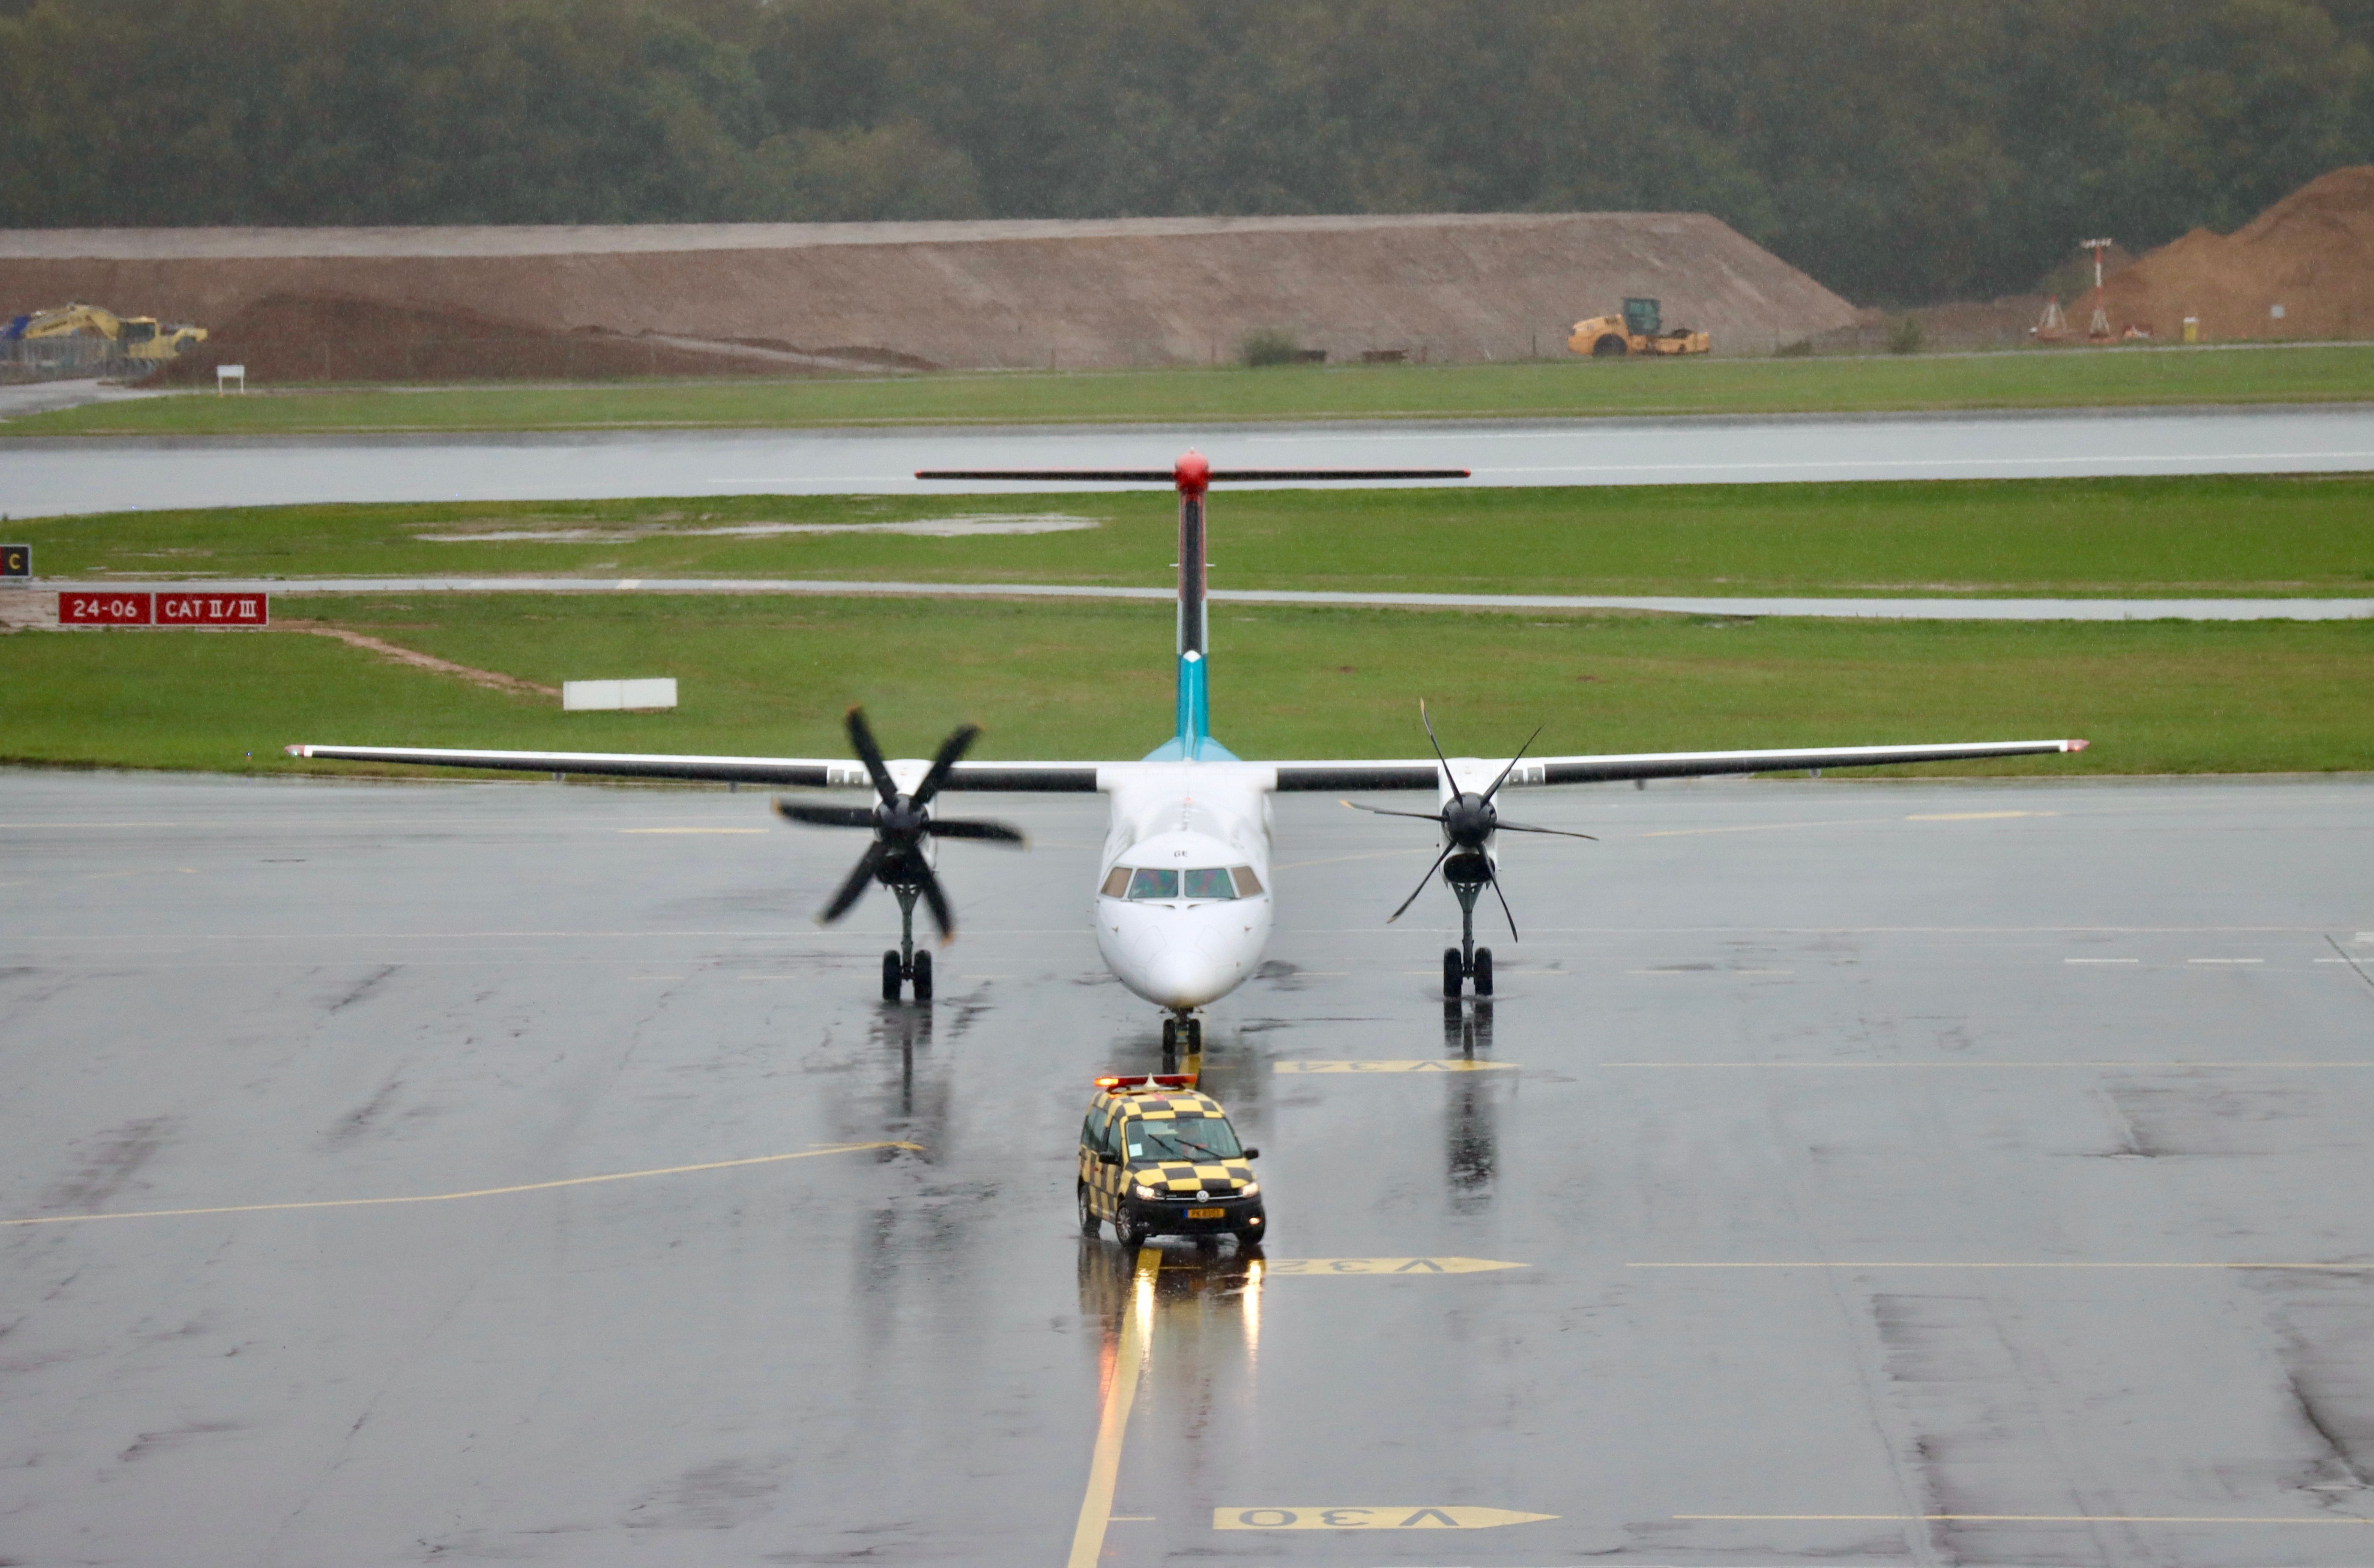 A Luxair Dash 8 Turboprop behind a Follow-Me Car on an airport apron.